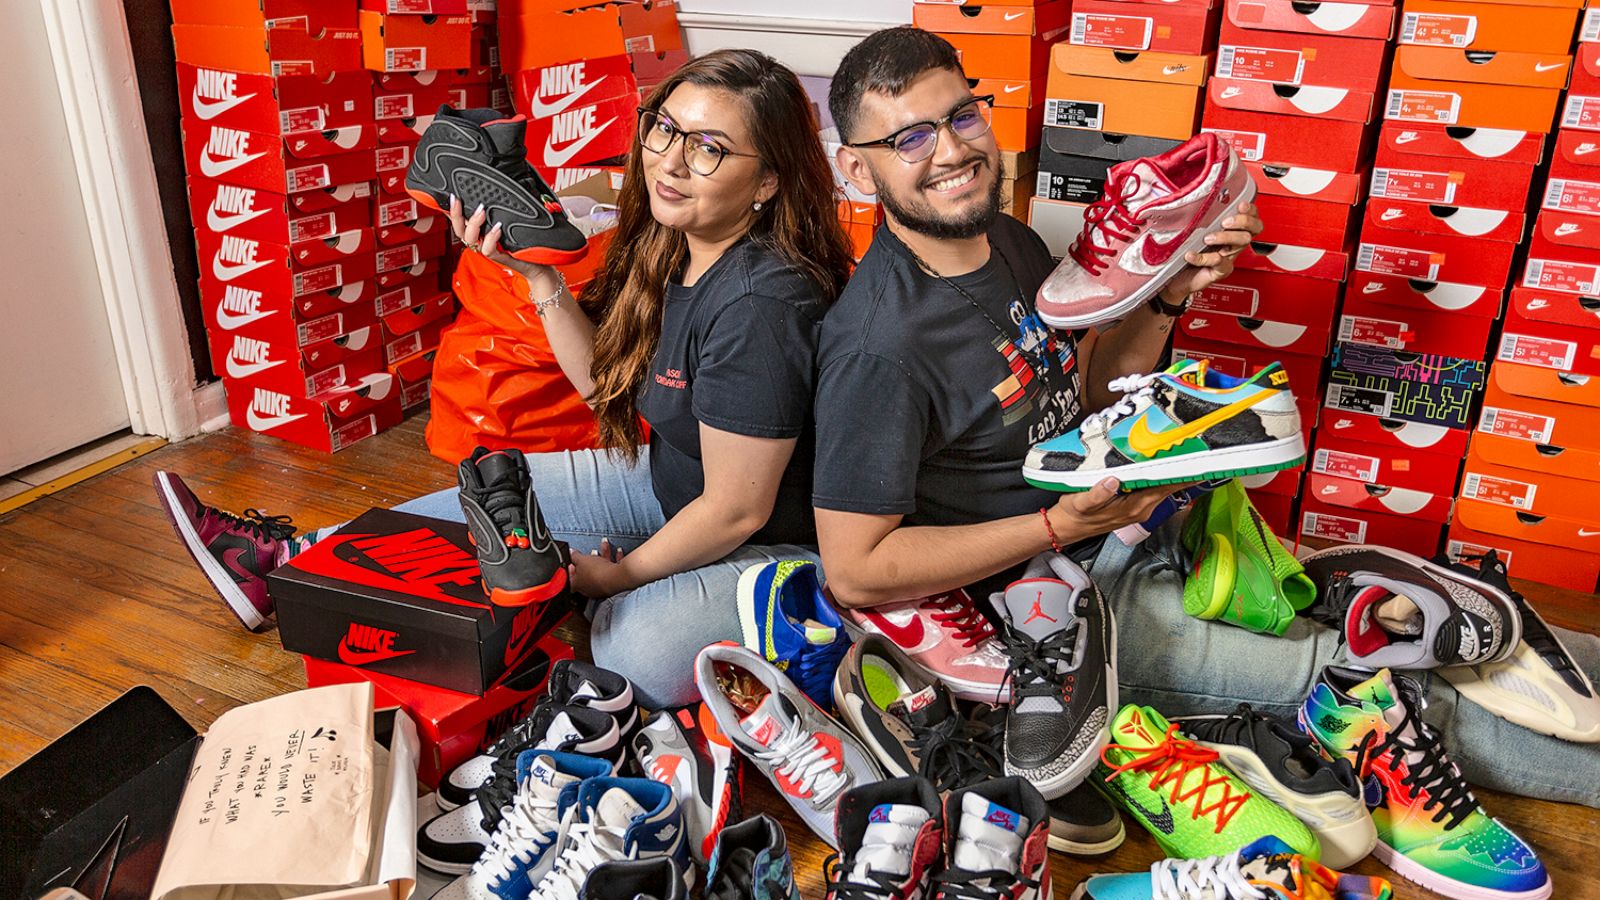 Dallas educators tap into culture to give shoes to students in need - Good America